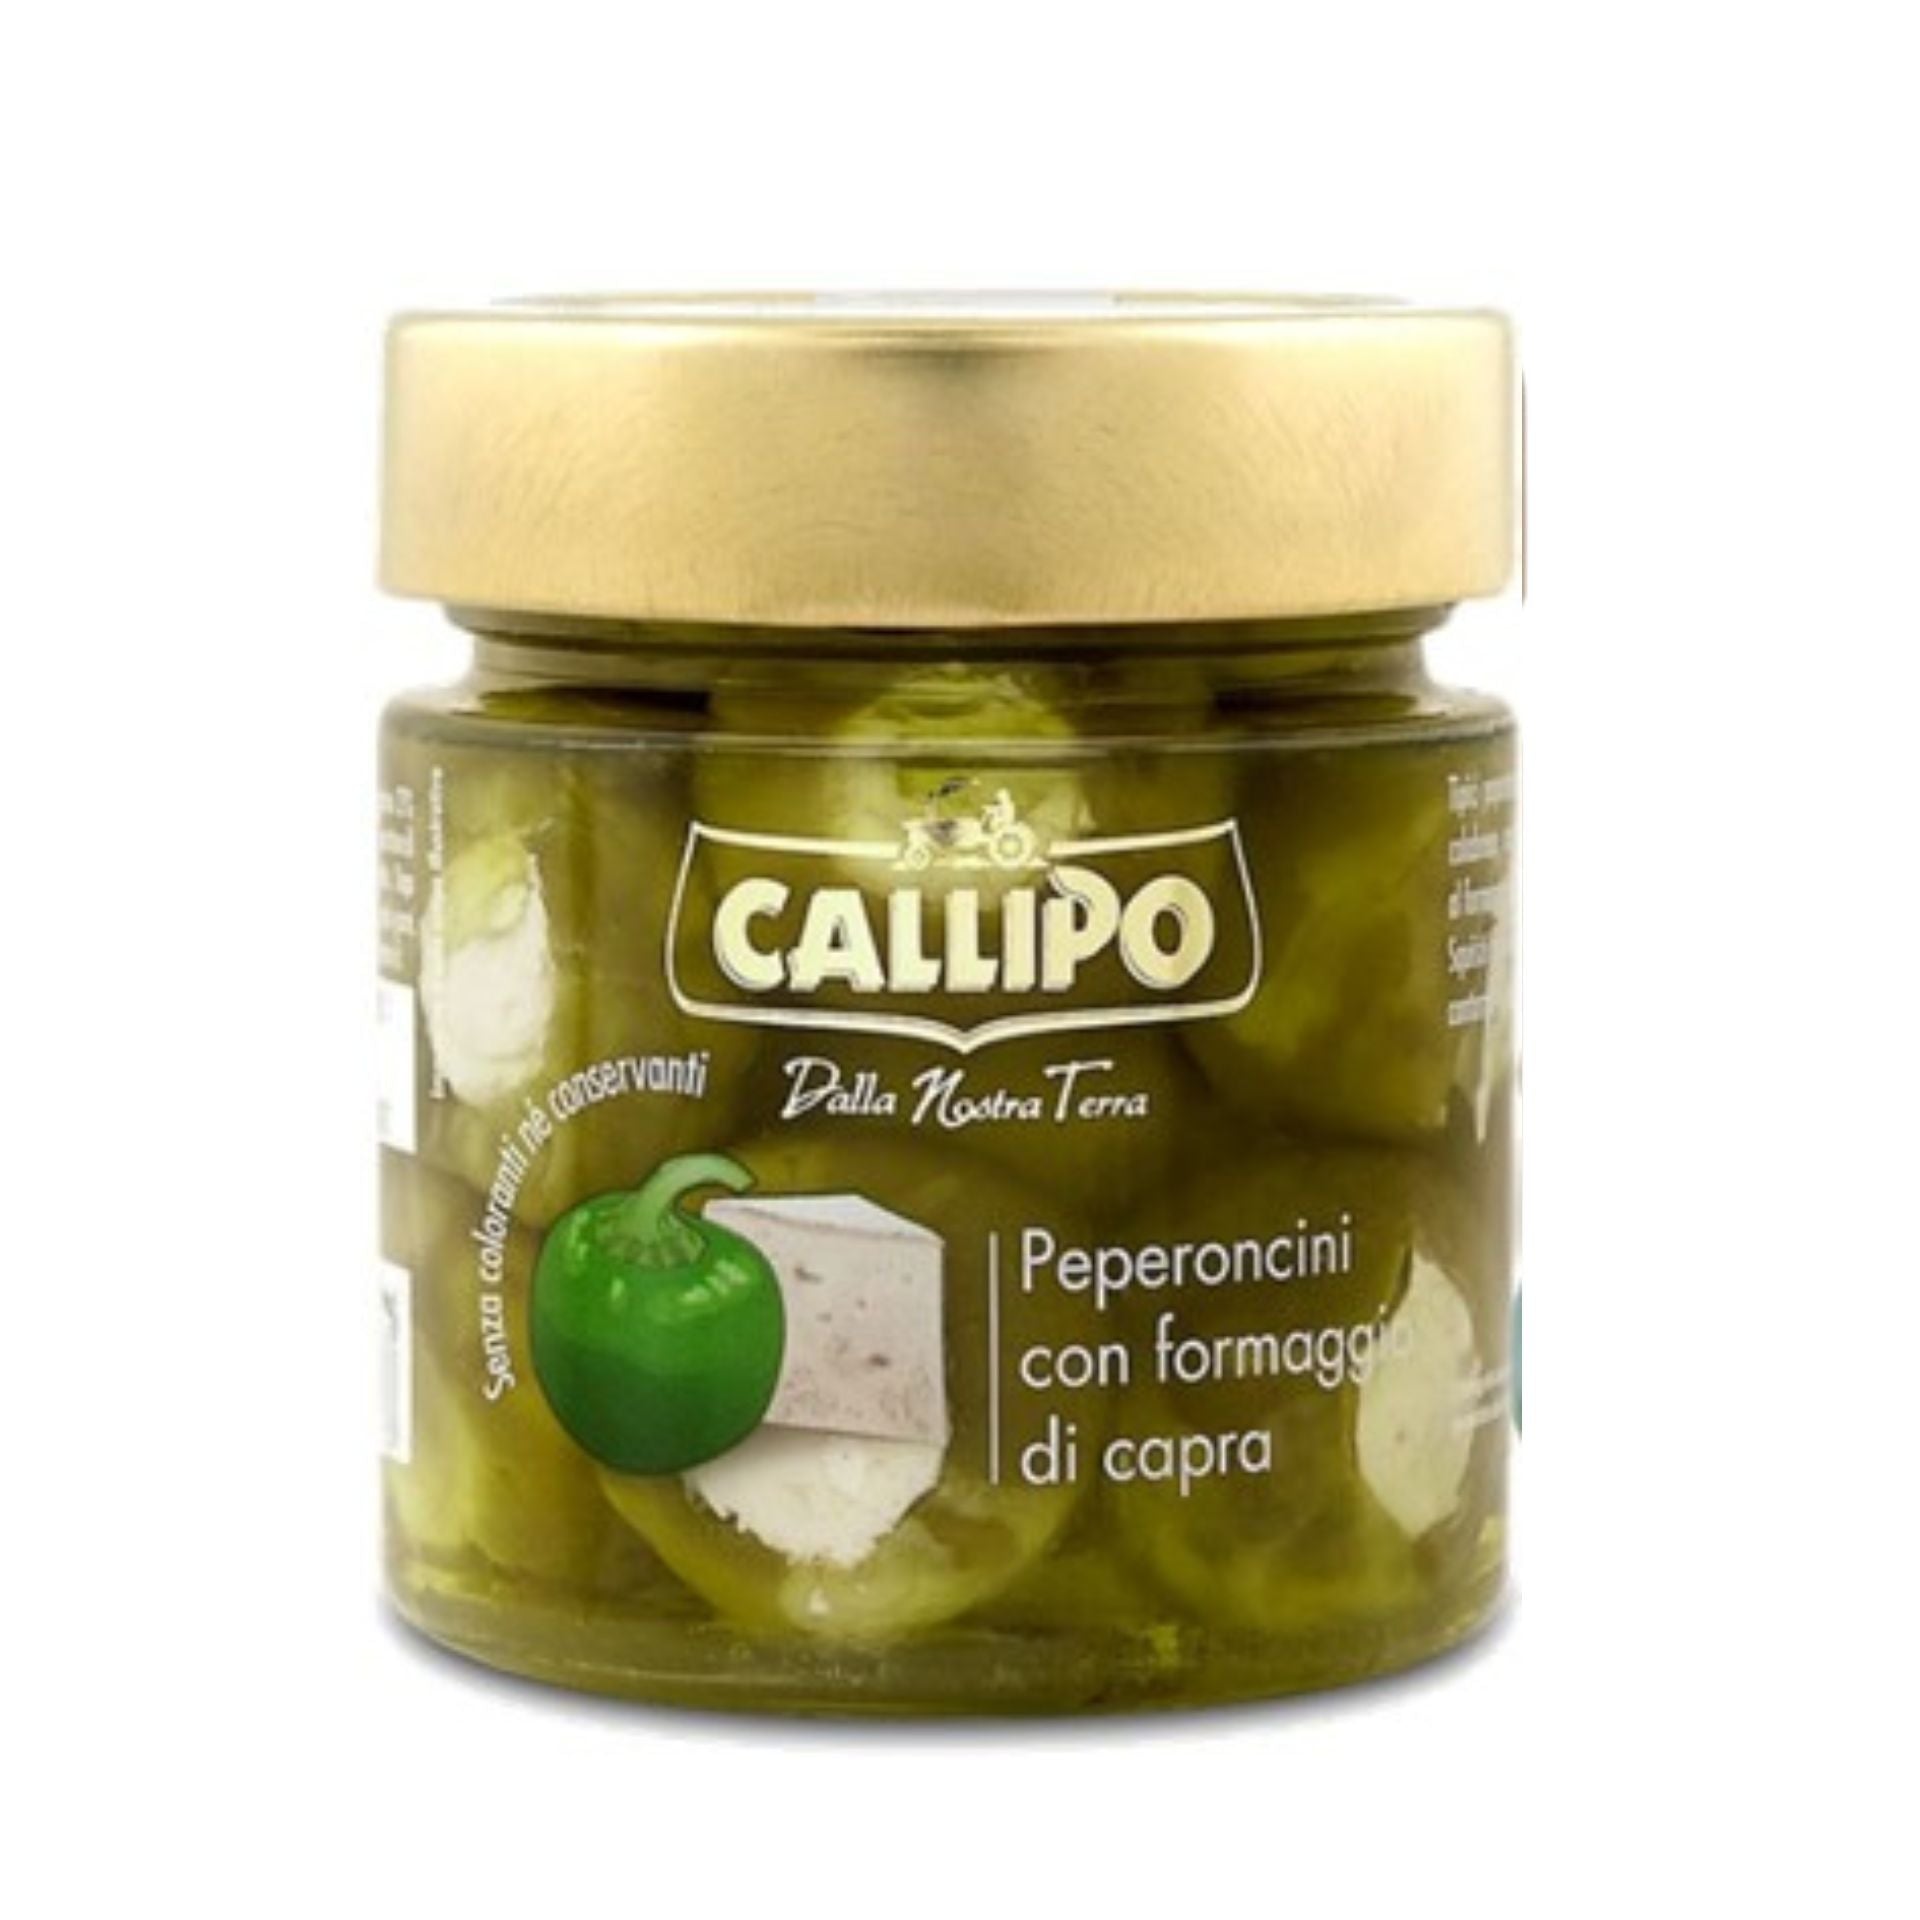 Callipo Green Peppers Stuffed with Goats Cheese 240g  | Imported and distributed in the UK by Just Gourmet Foods